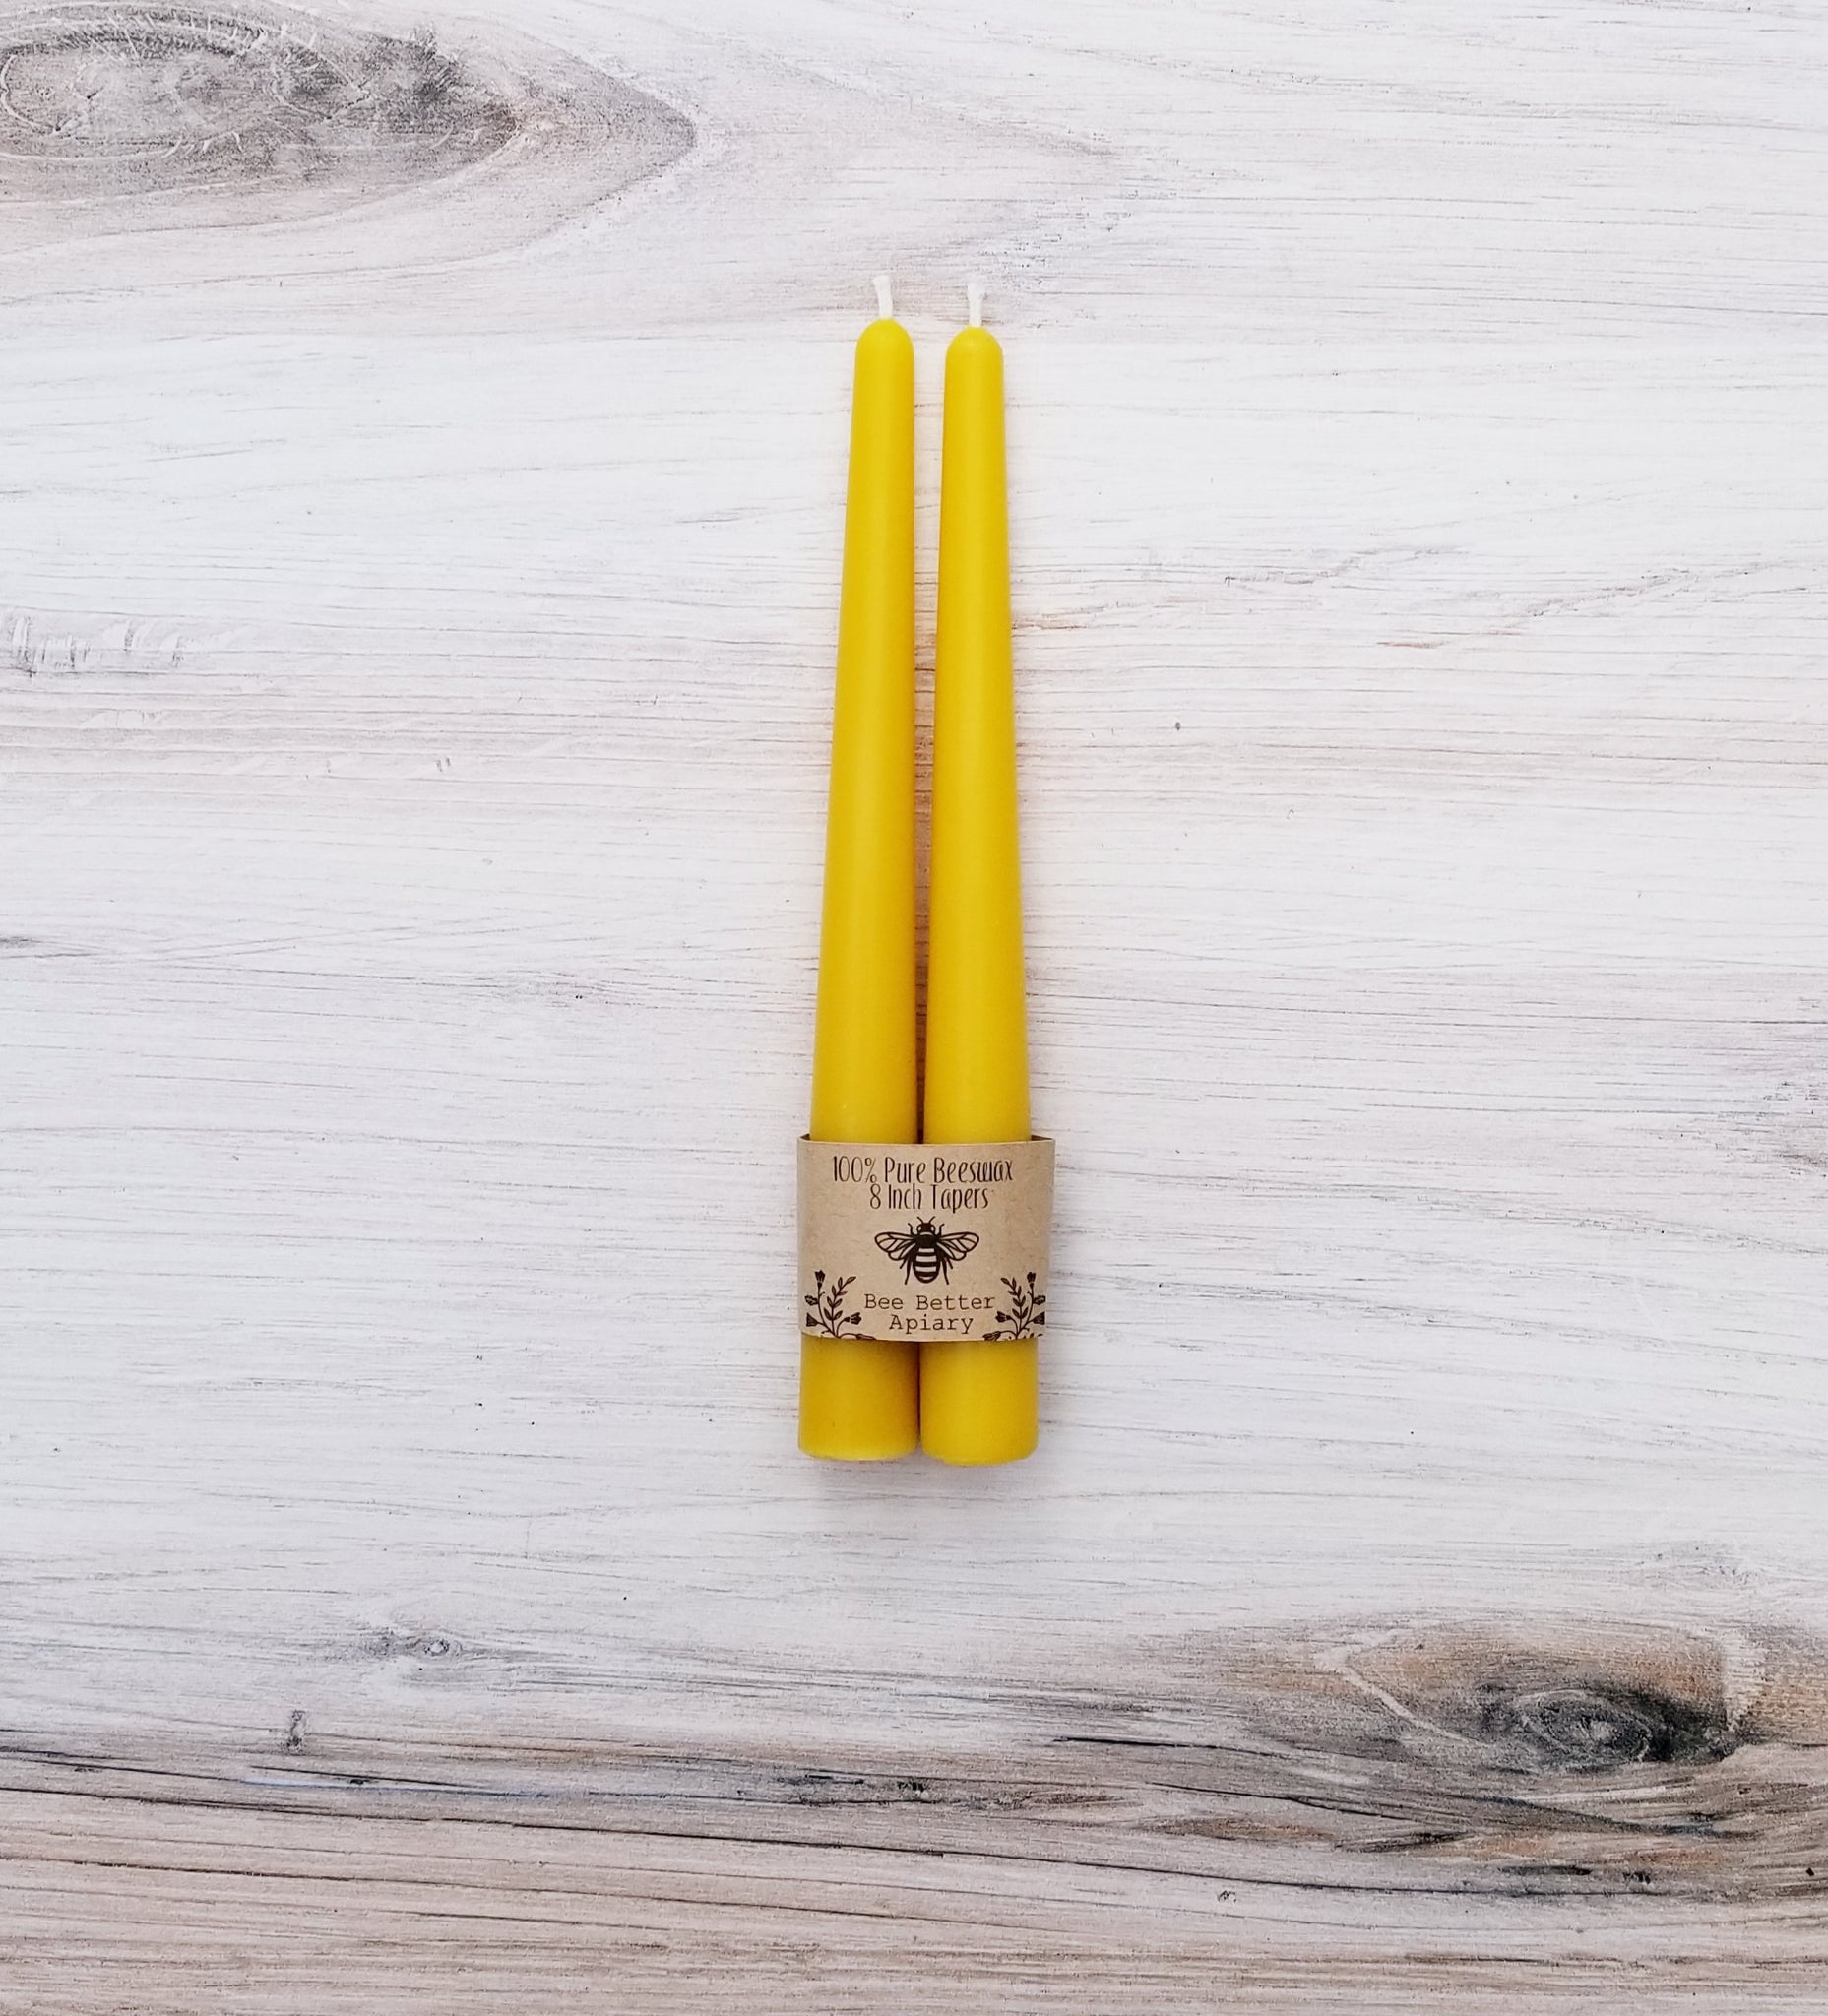 100% Pure Beeswax 8 Inch Taper Candles (Set of 2)